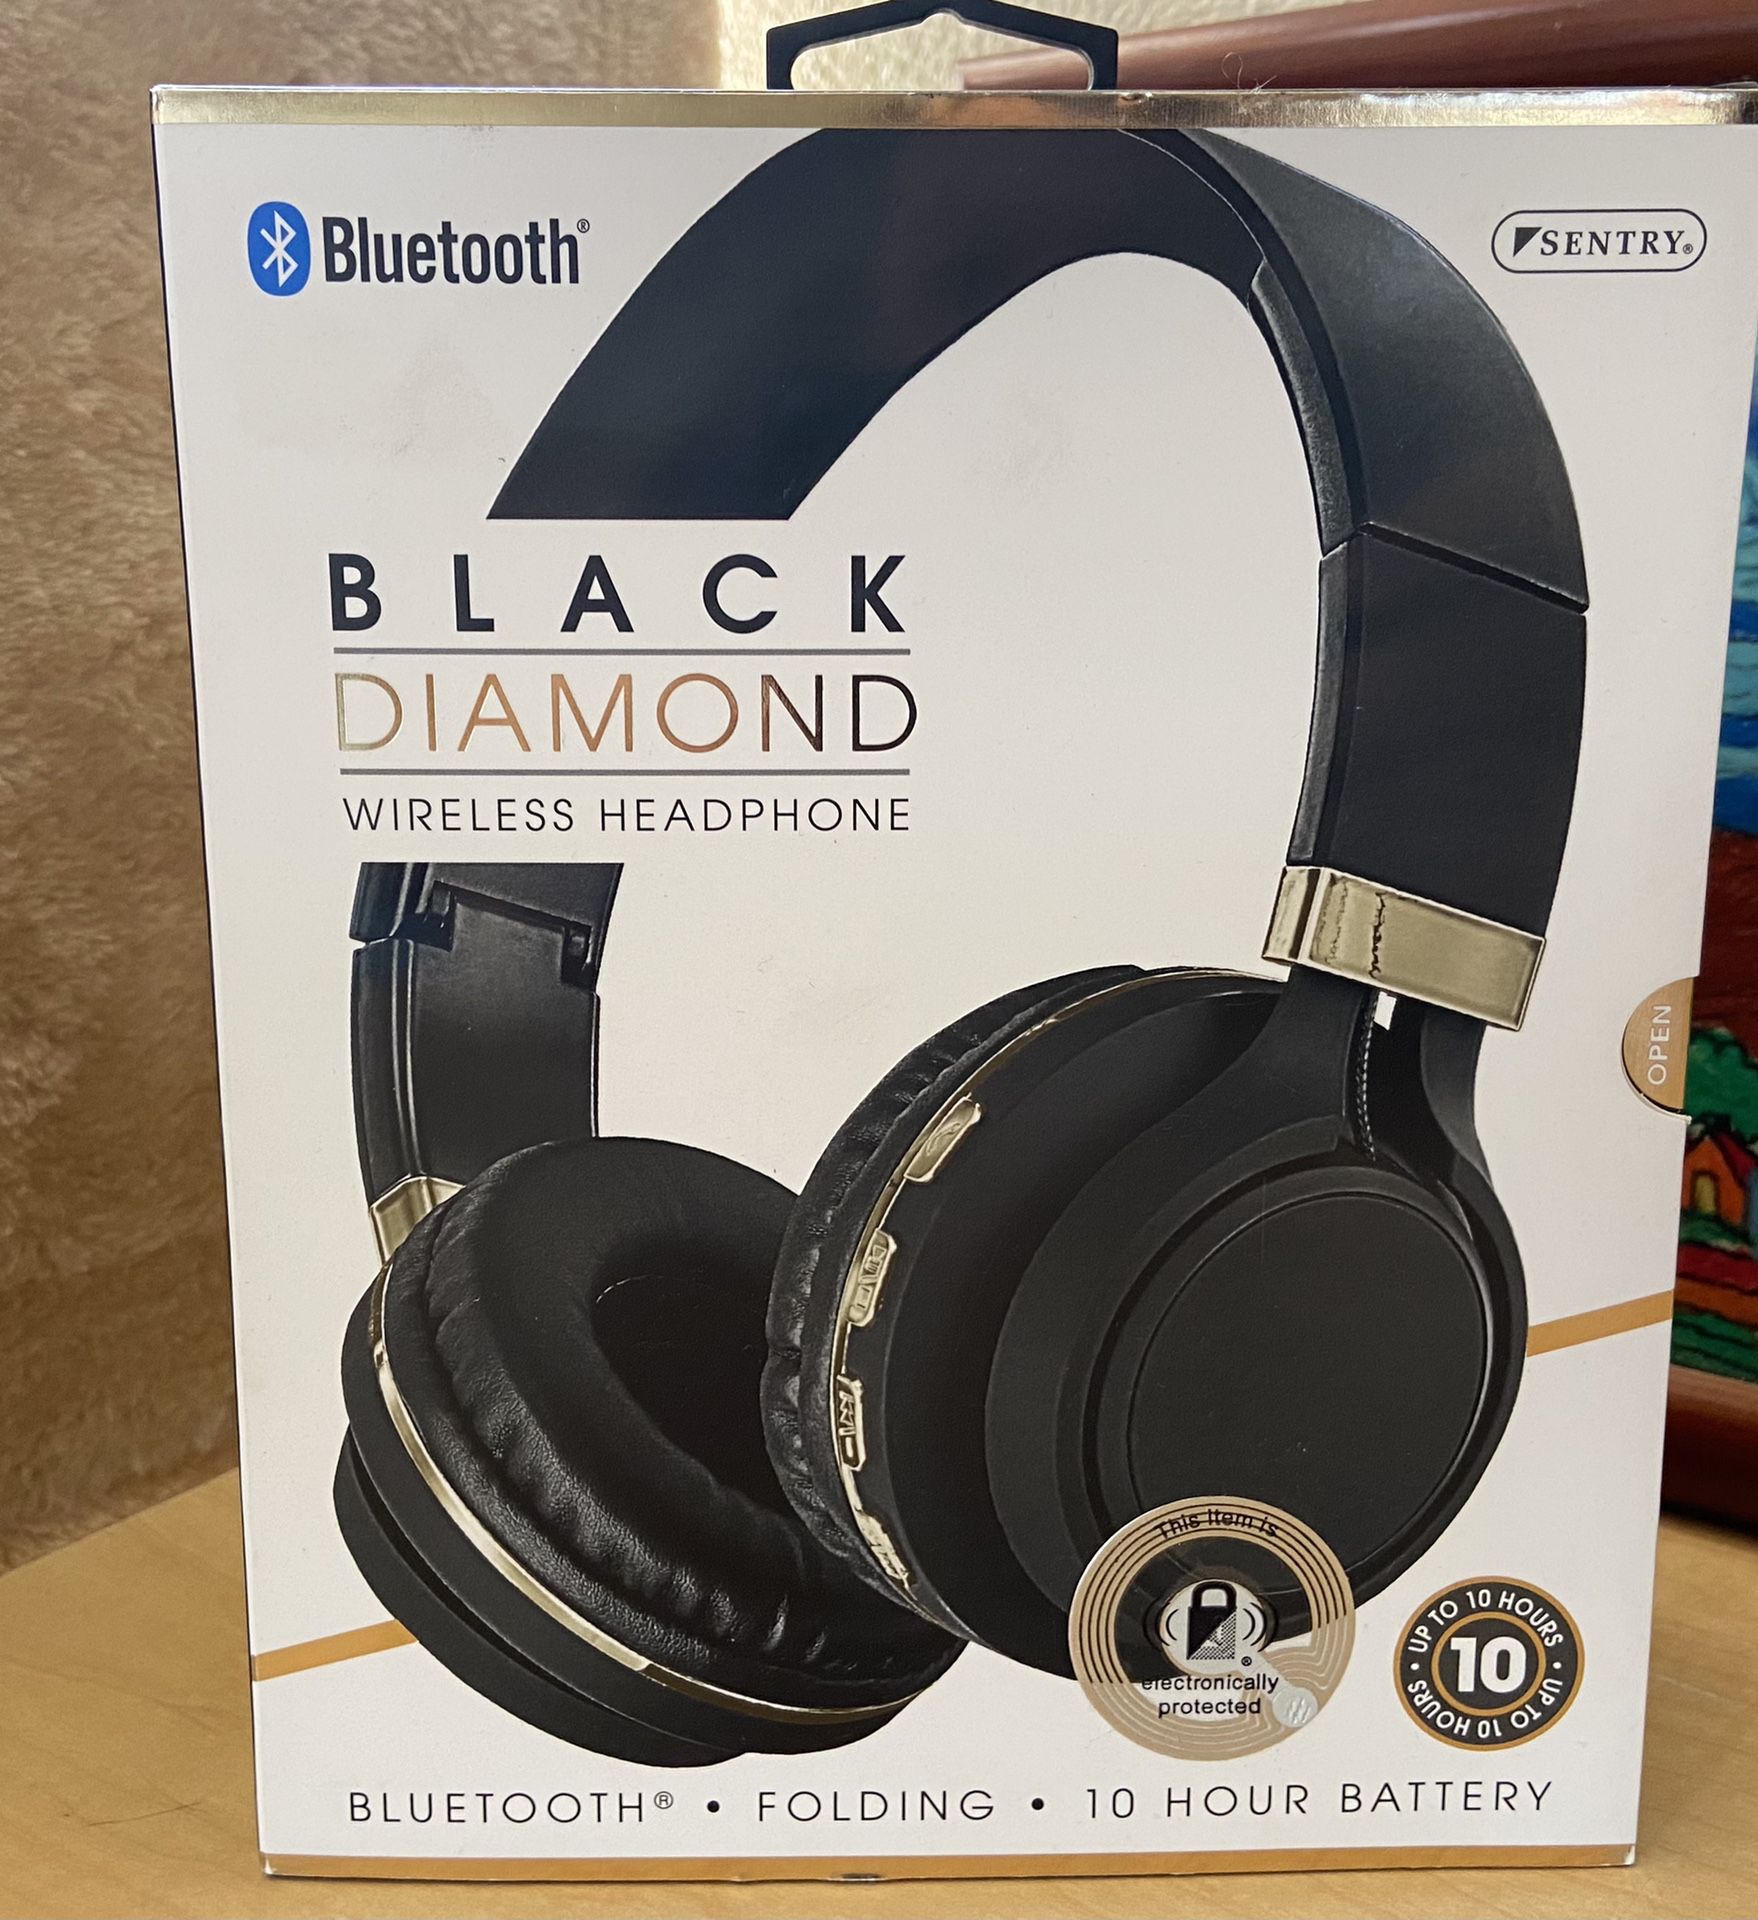 Bluetooth black diamond wireless headphone/rechargeable battery up to 10 hours